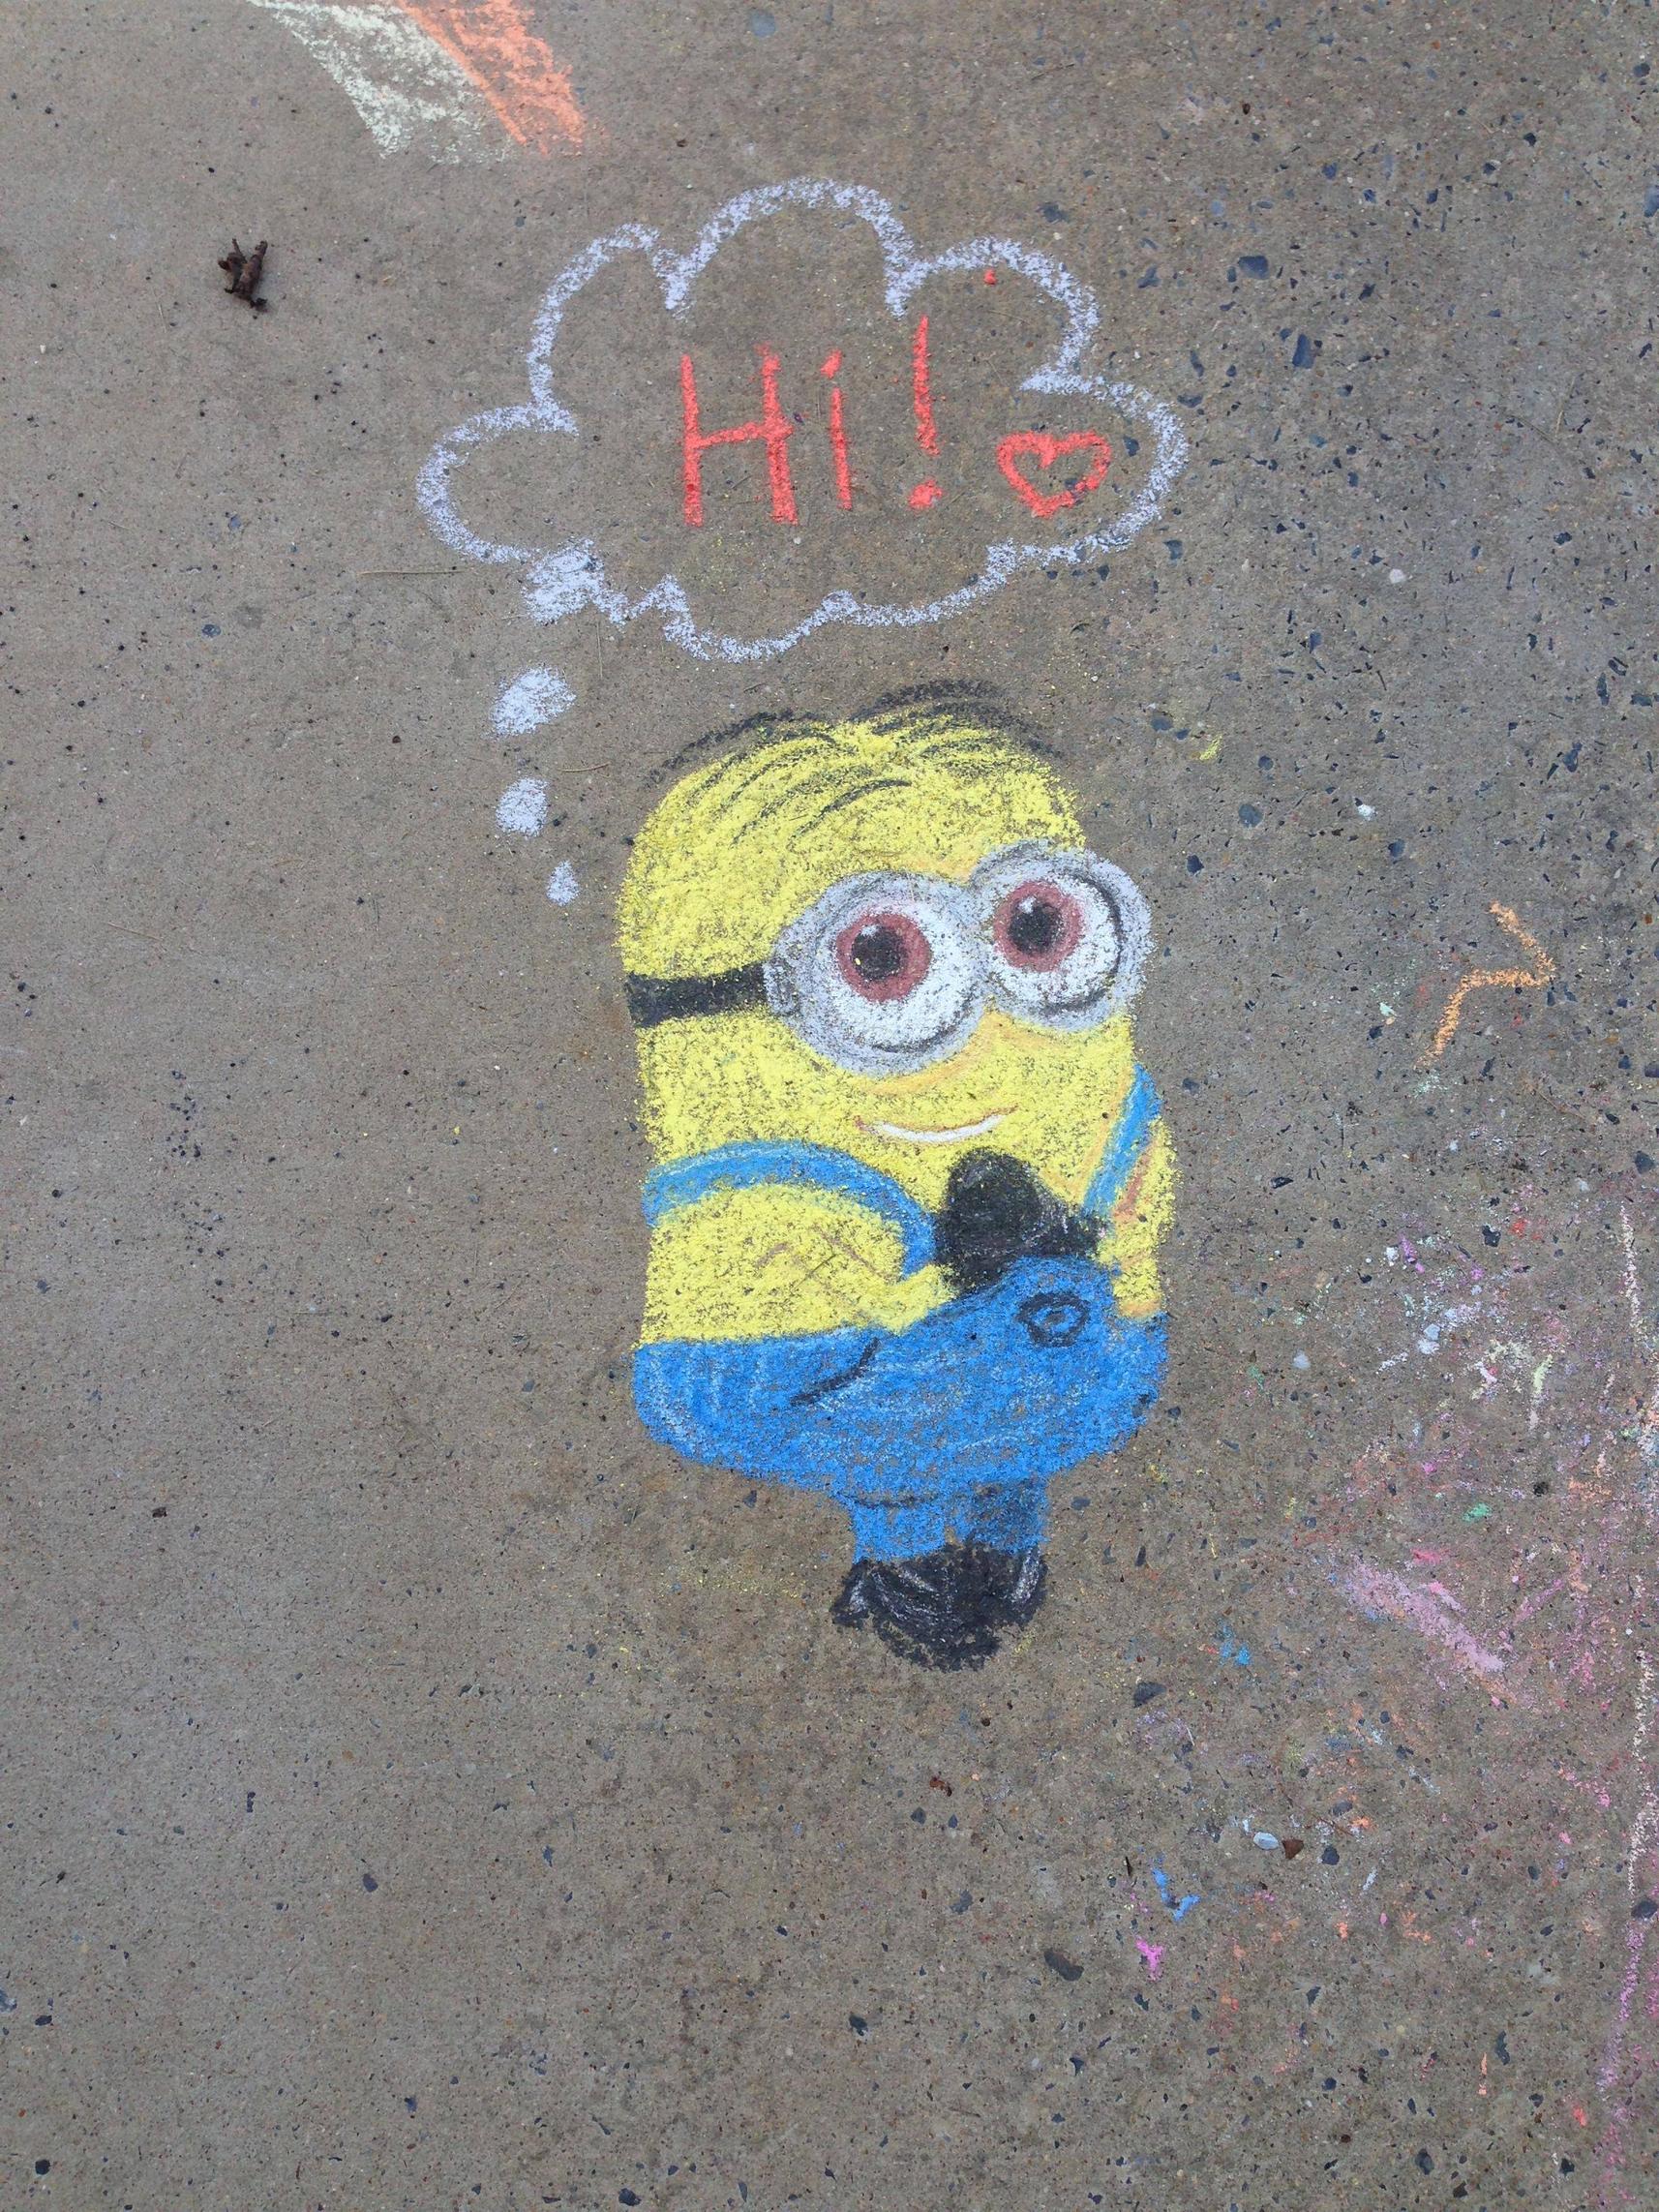 Talented Girl Shows Off Her Awesome Chalk Art!